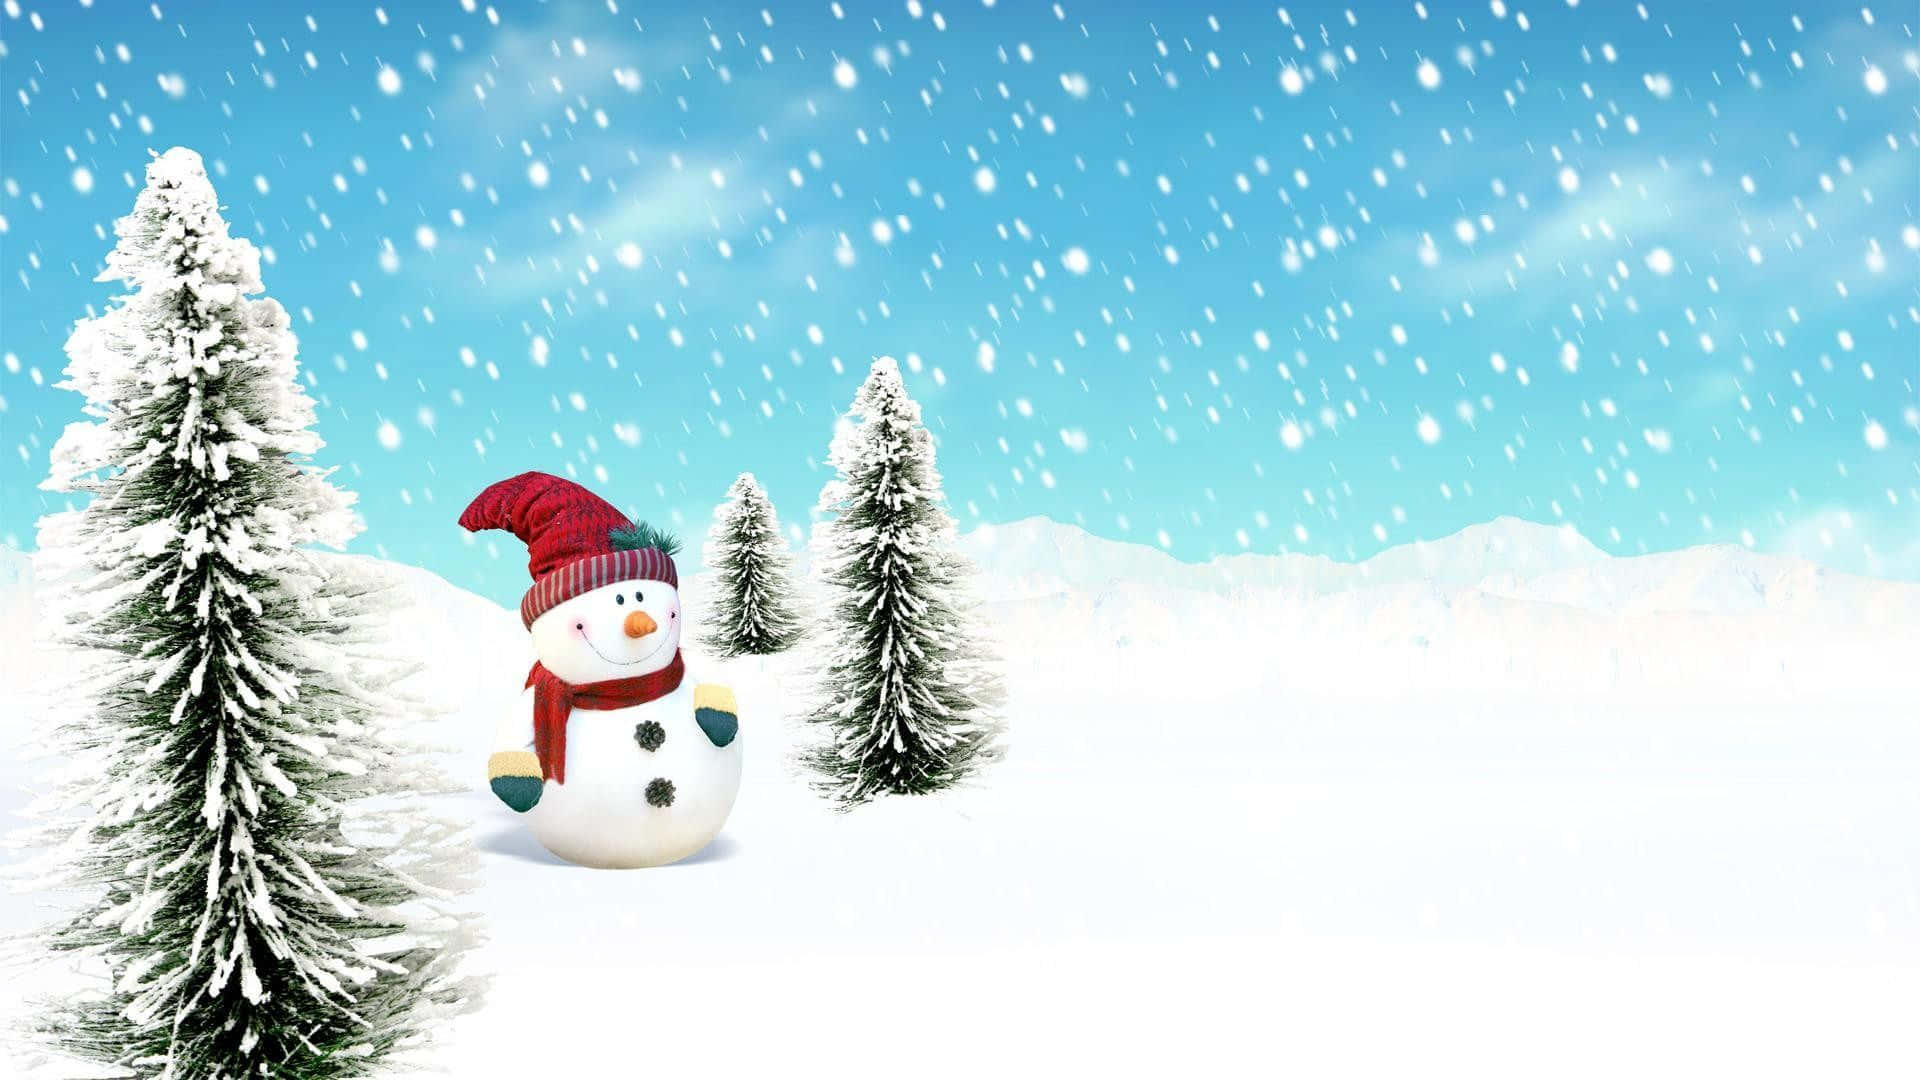 Marvel in the Magical Winter Wonderland with a Snowman Wallpaper